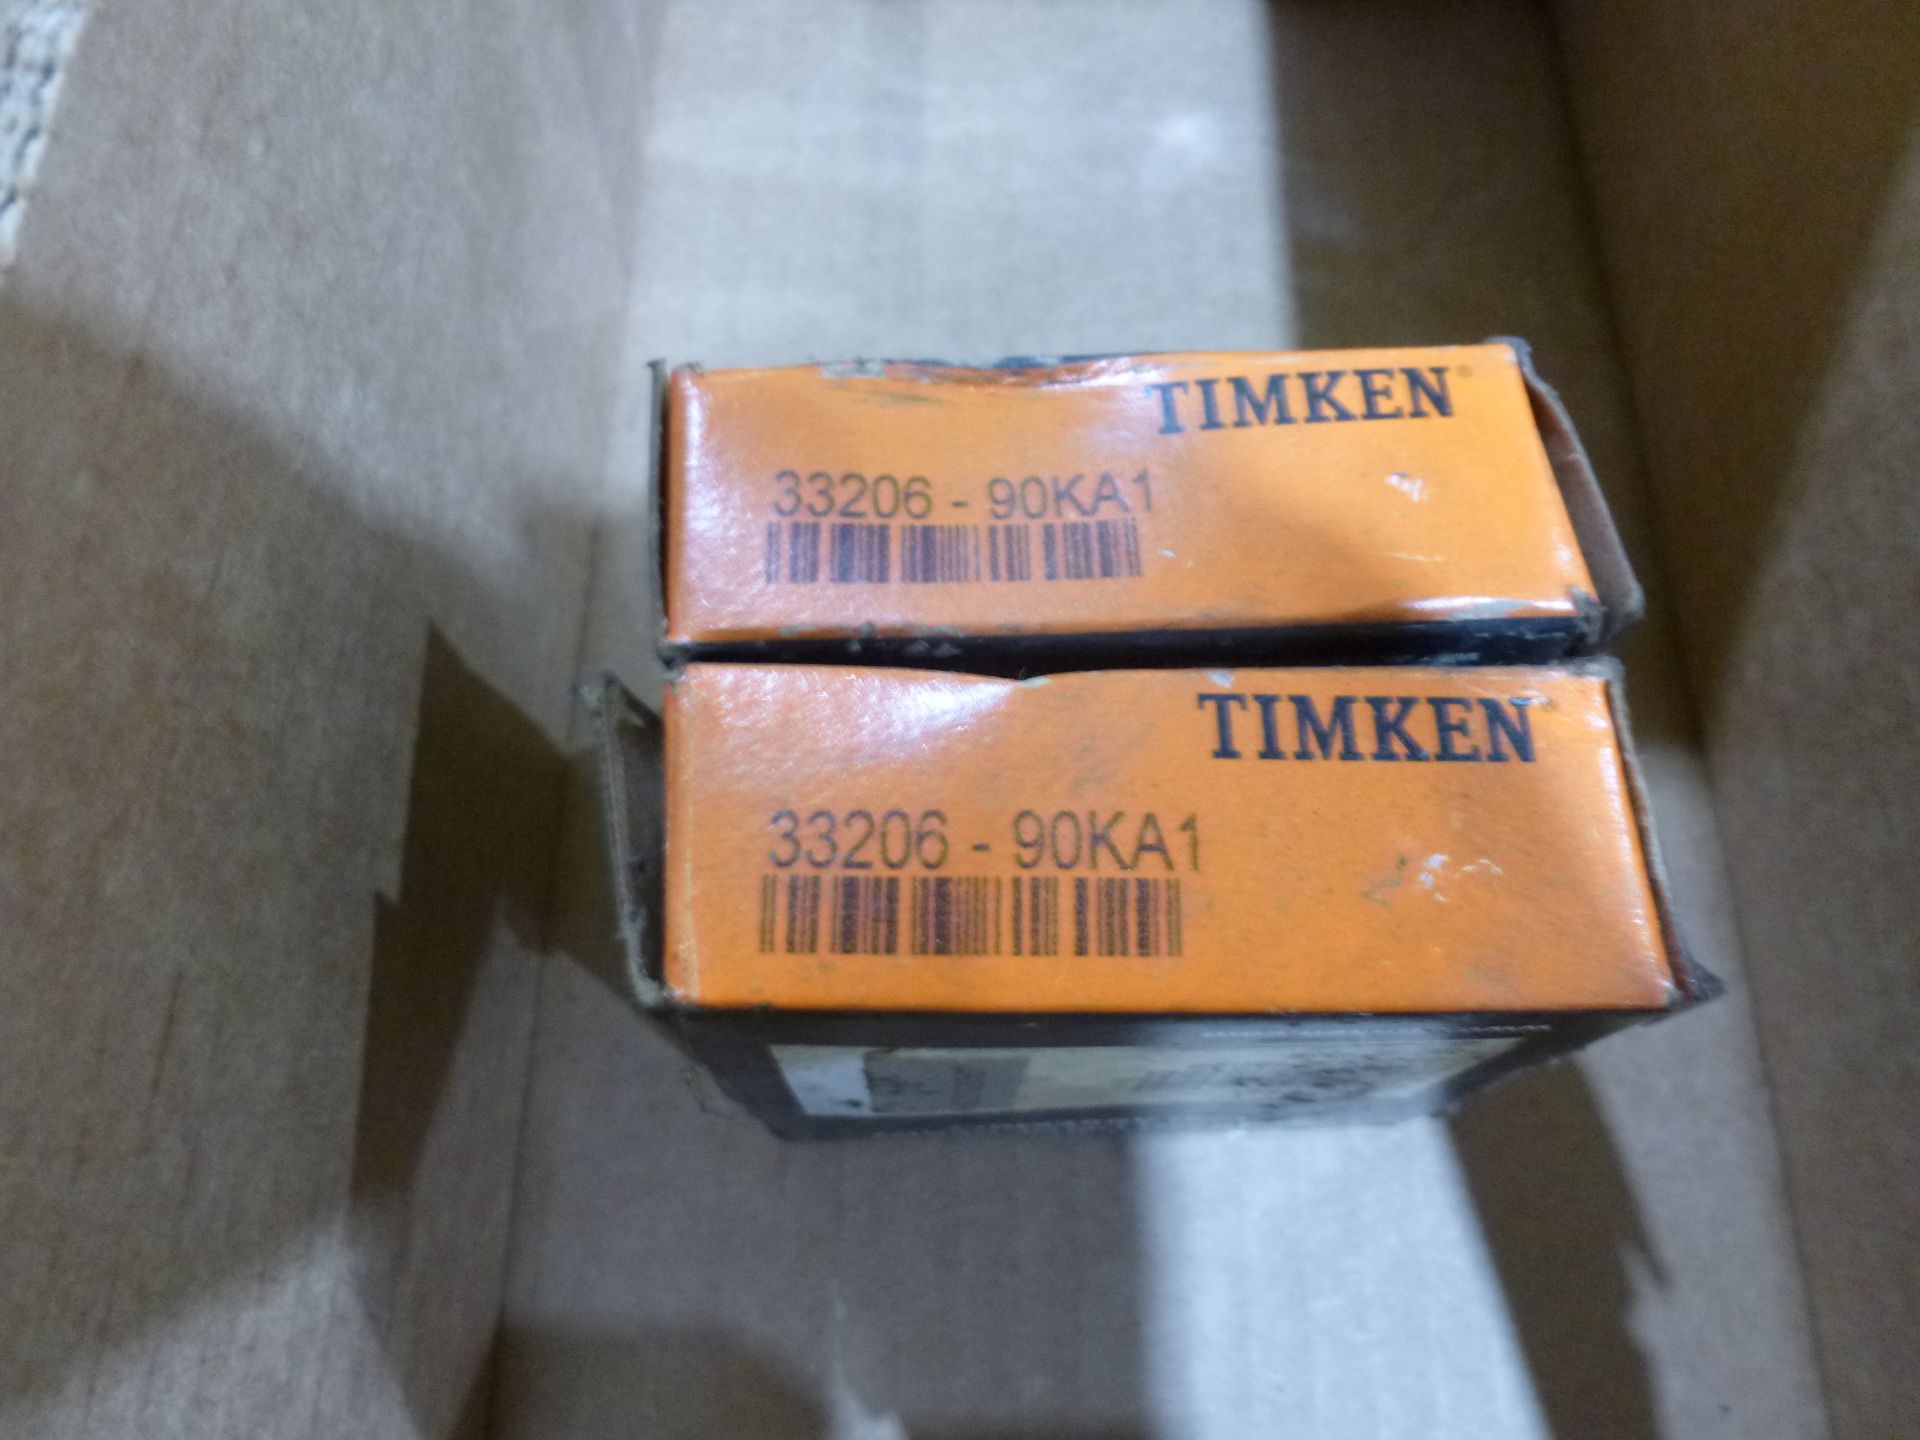 Qty 2 Timken bearing 33206-90KA1, as always with Brolyn LLC auctions, all lots can be picked up from - Image 2 of 2